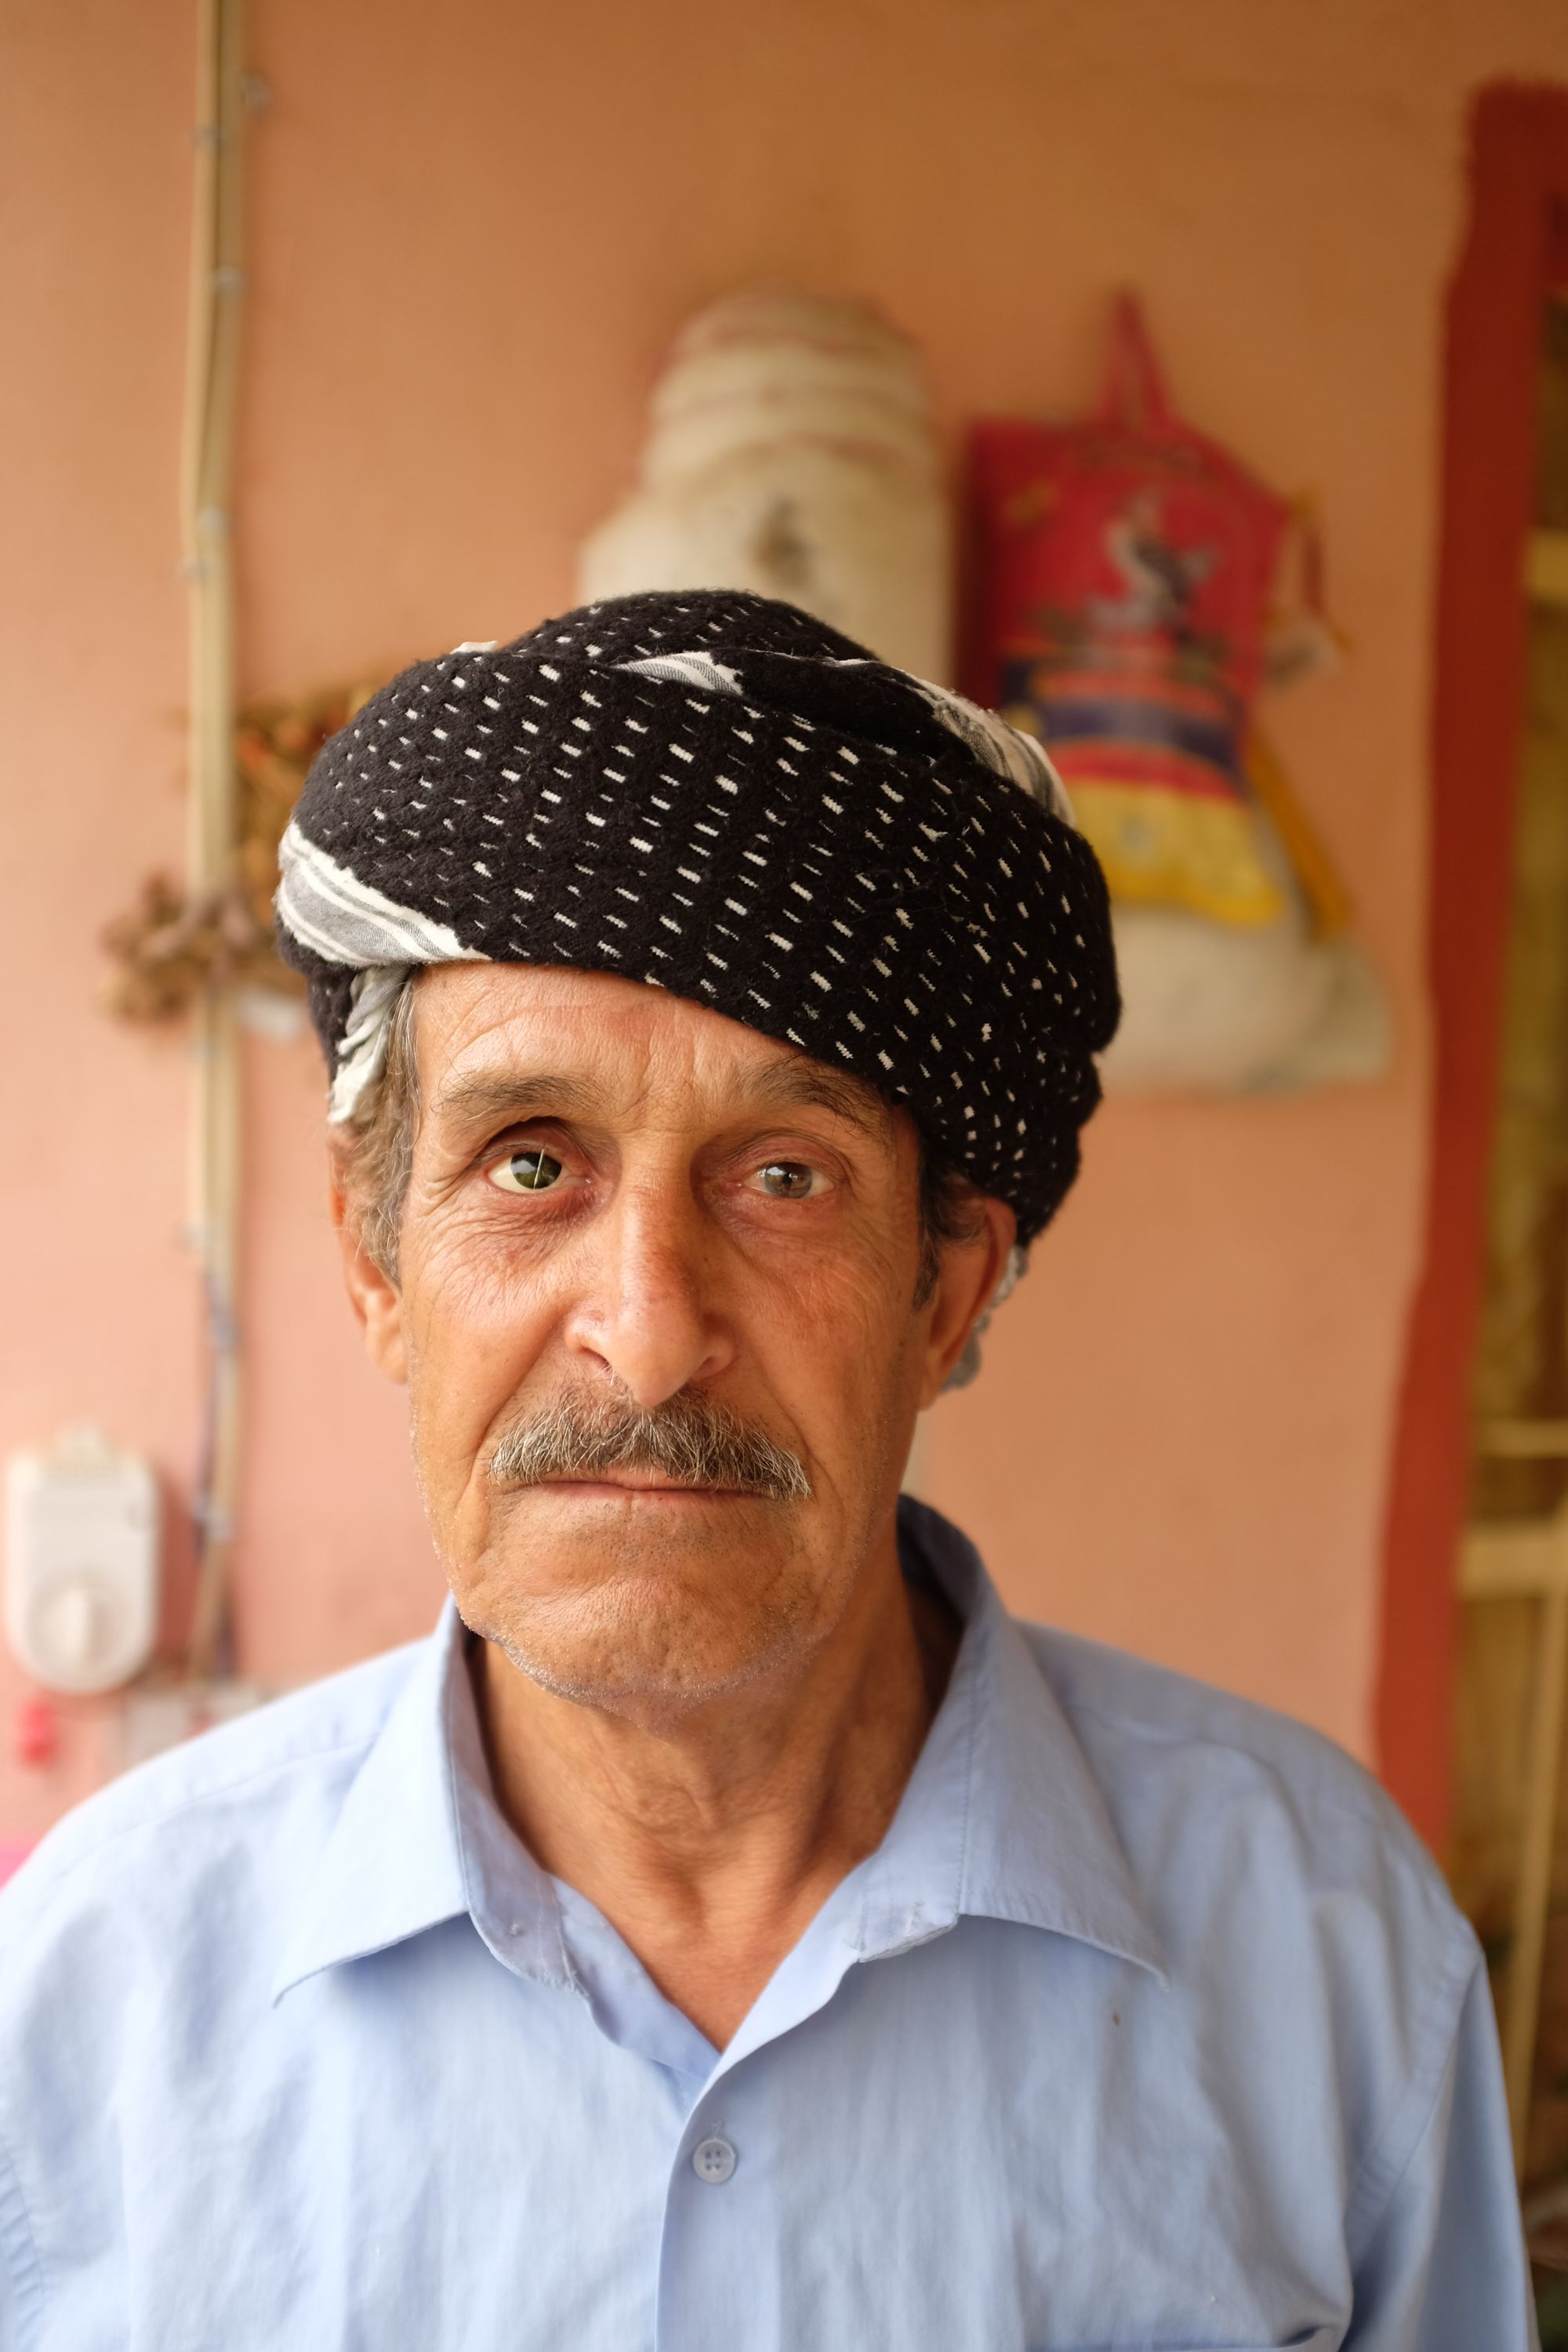 A one-eyed man wearing a turban looks into the camera.